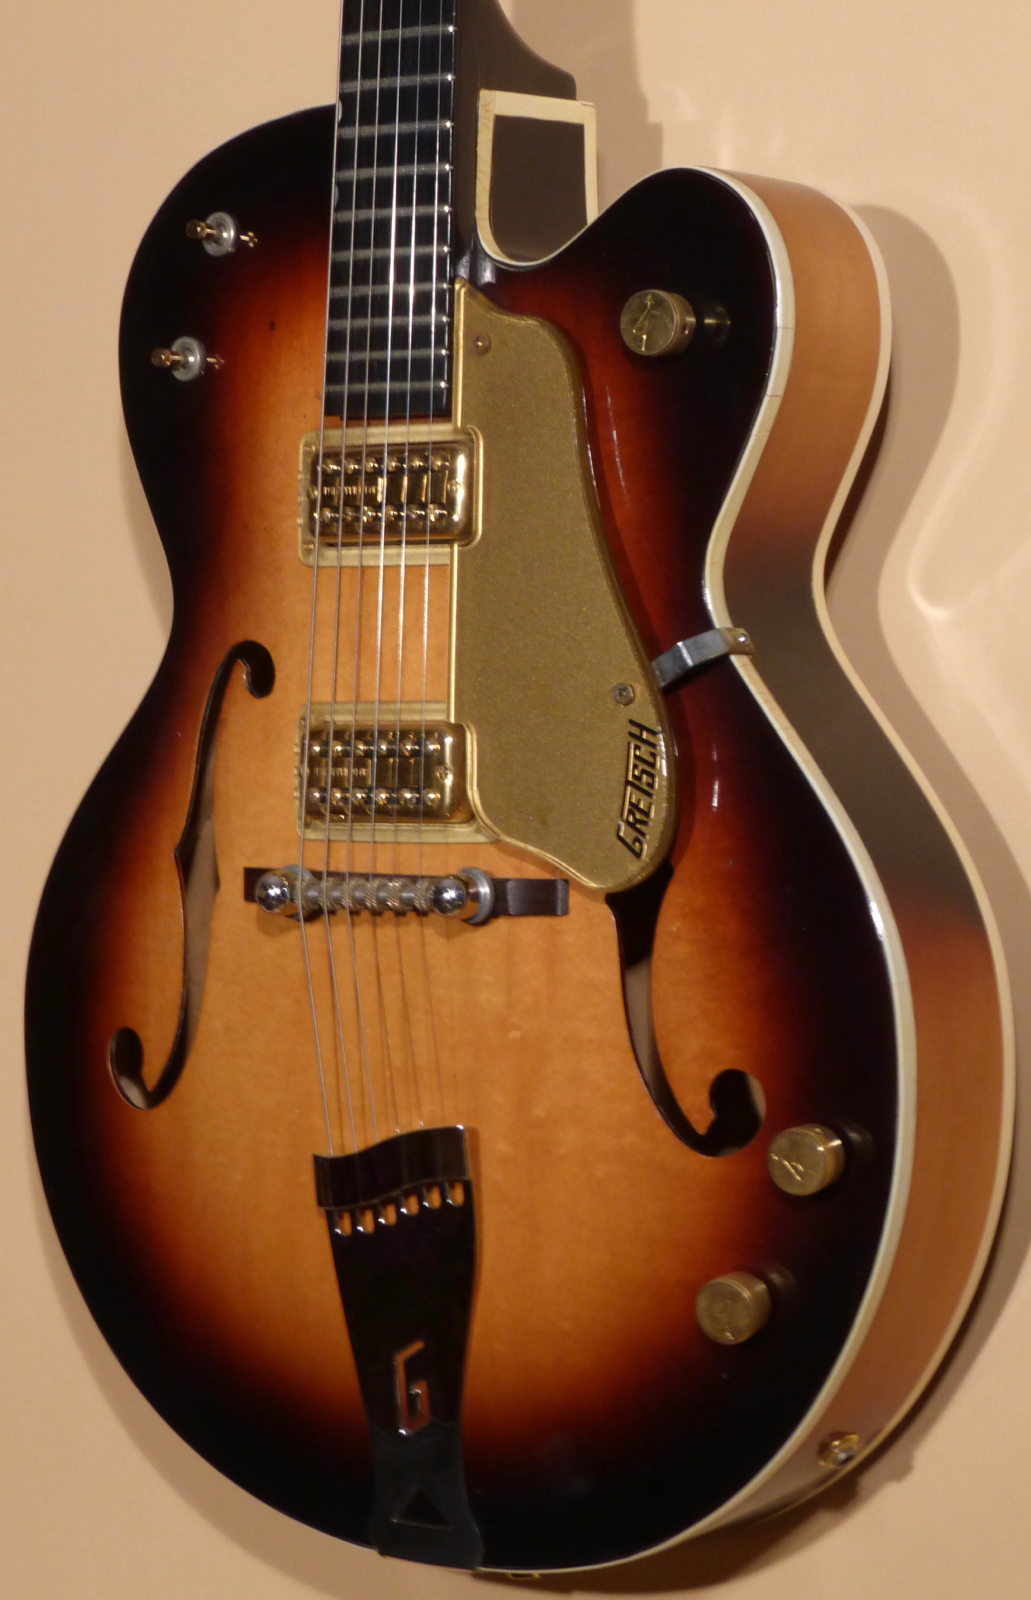 1958 Gretsch “Double” Anniversary Product